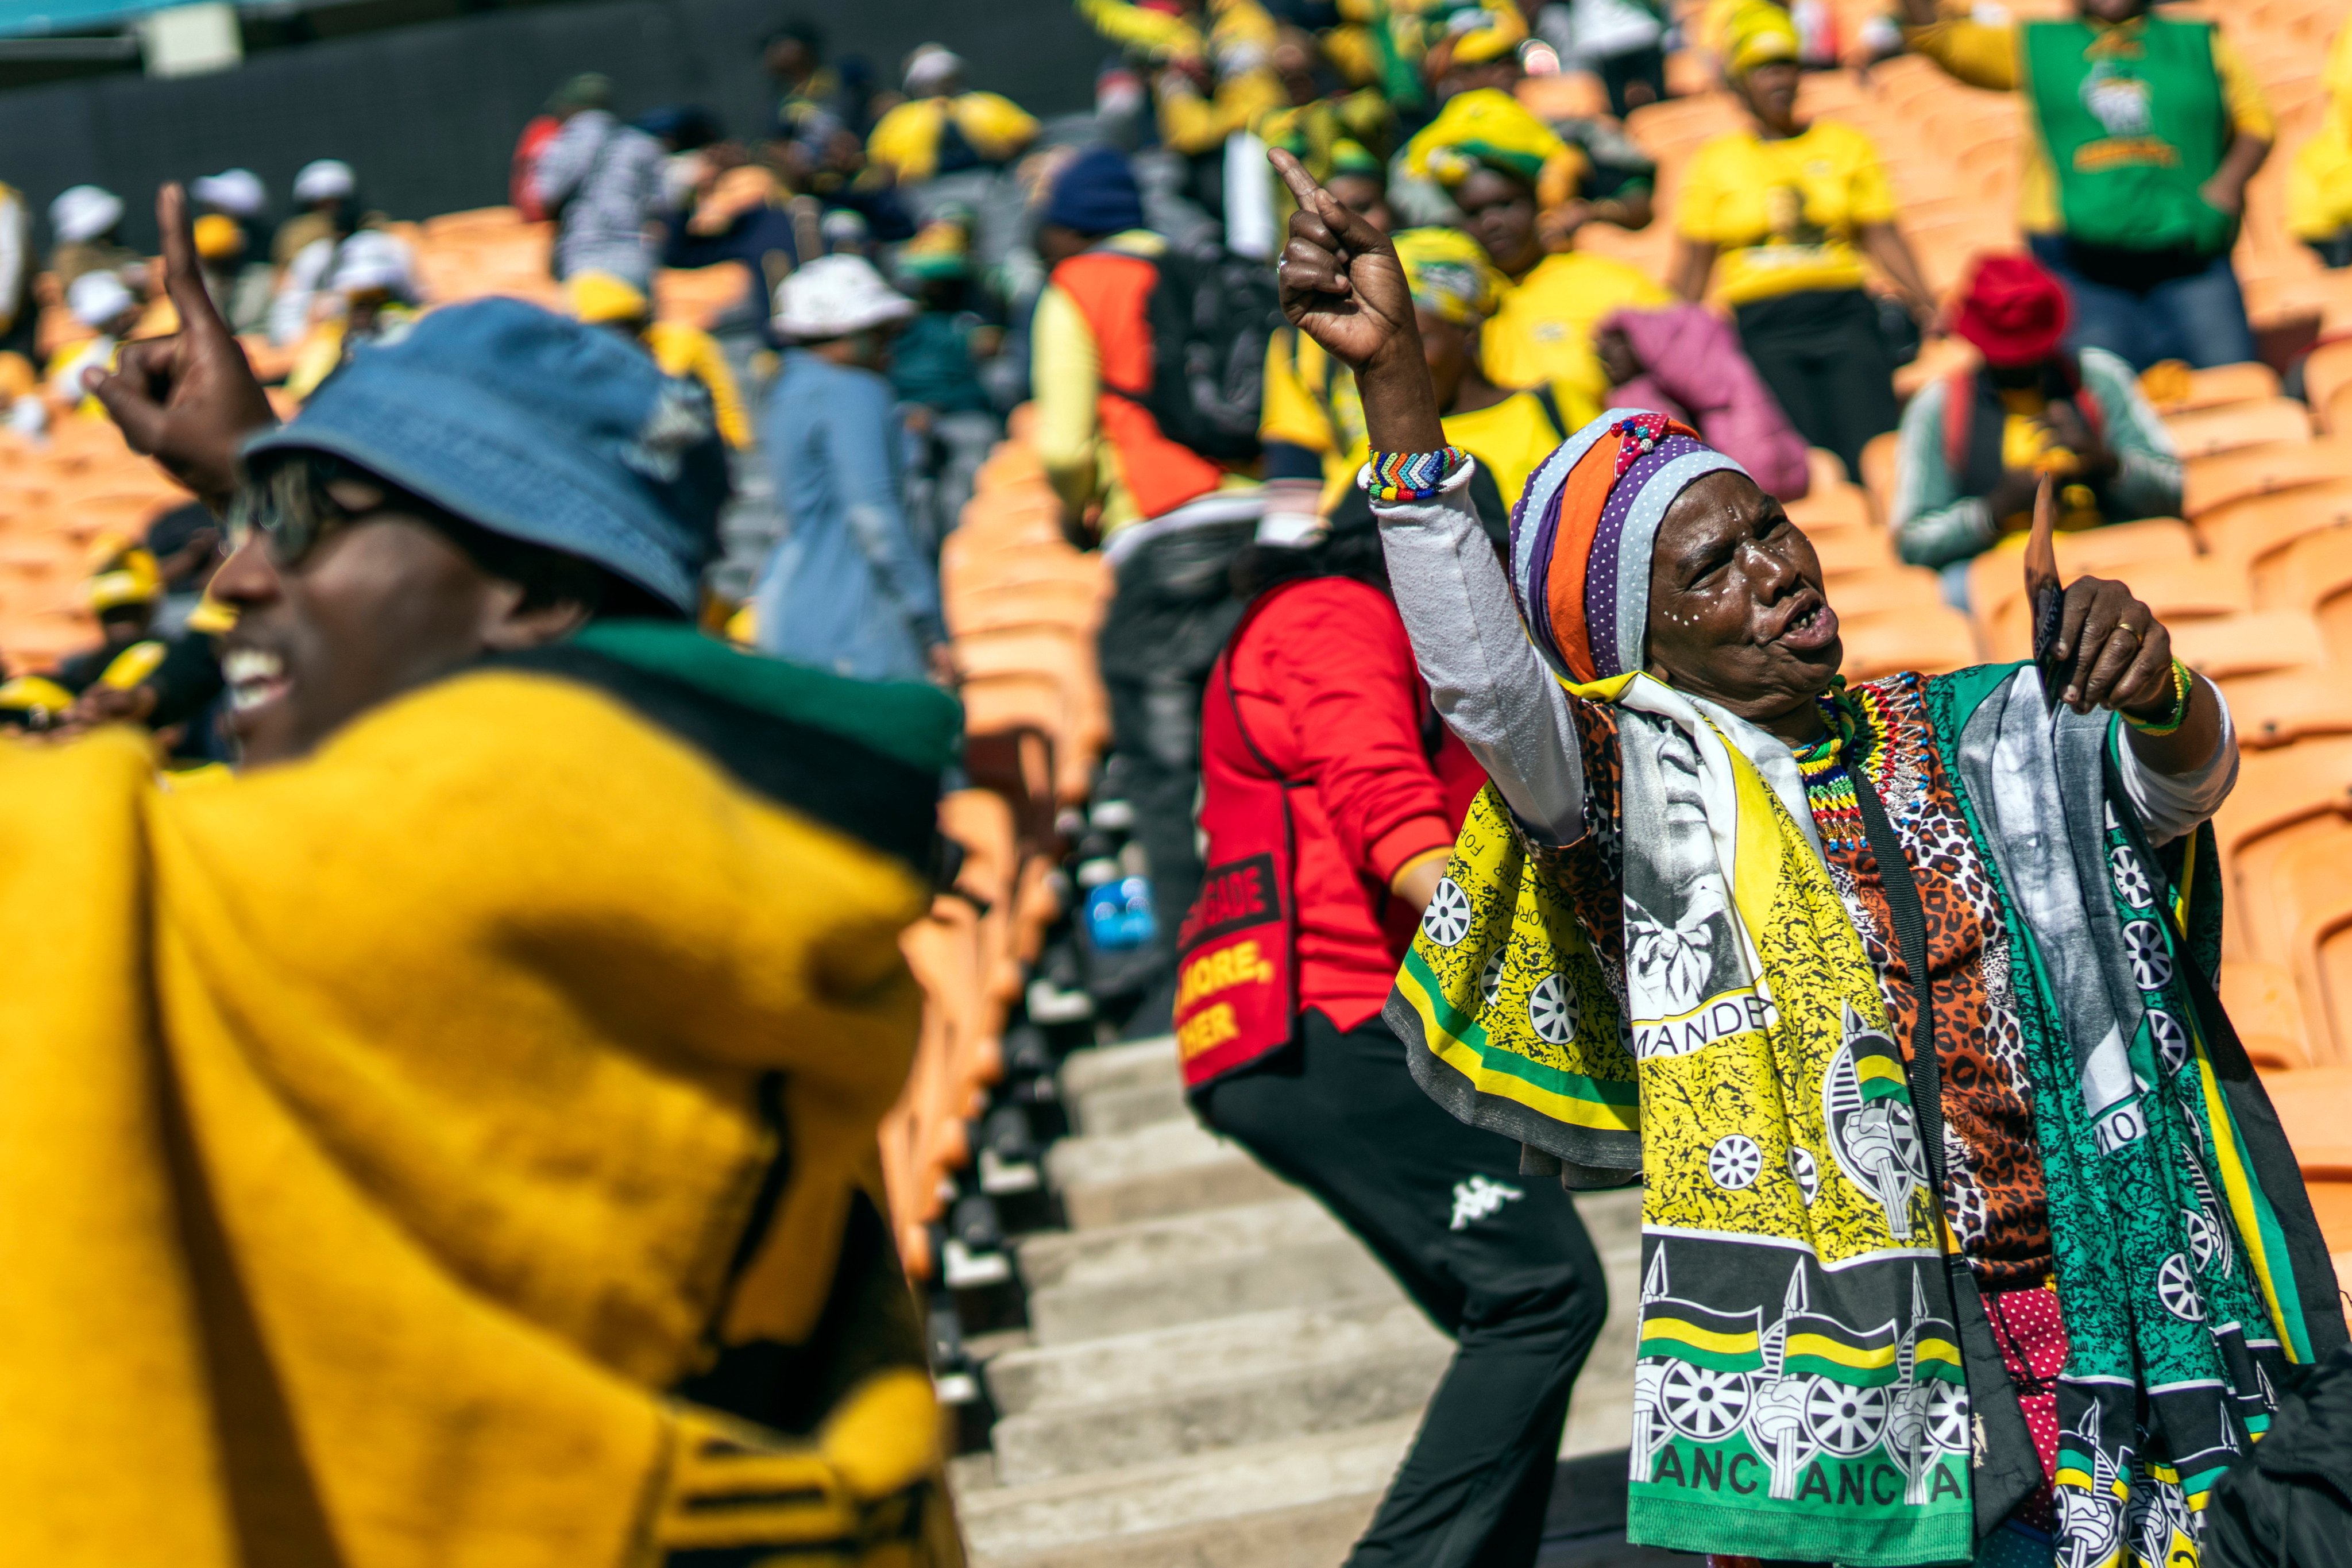 African National Congress supporters attend a rally in Johannesburg, South Africa, on May 25. Photo: AP